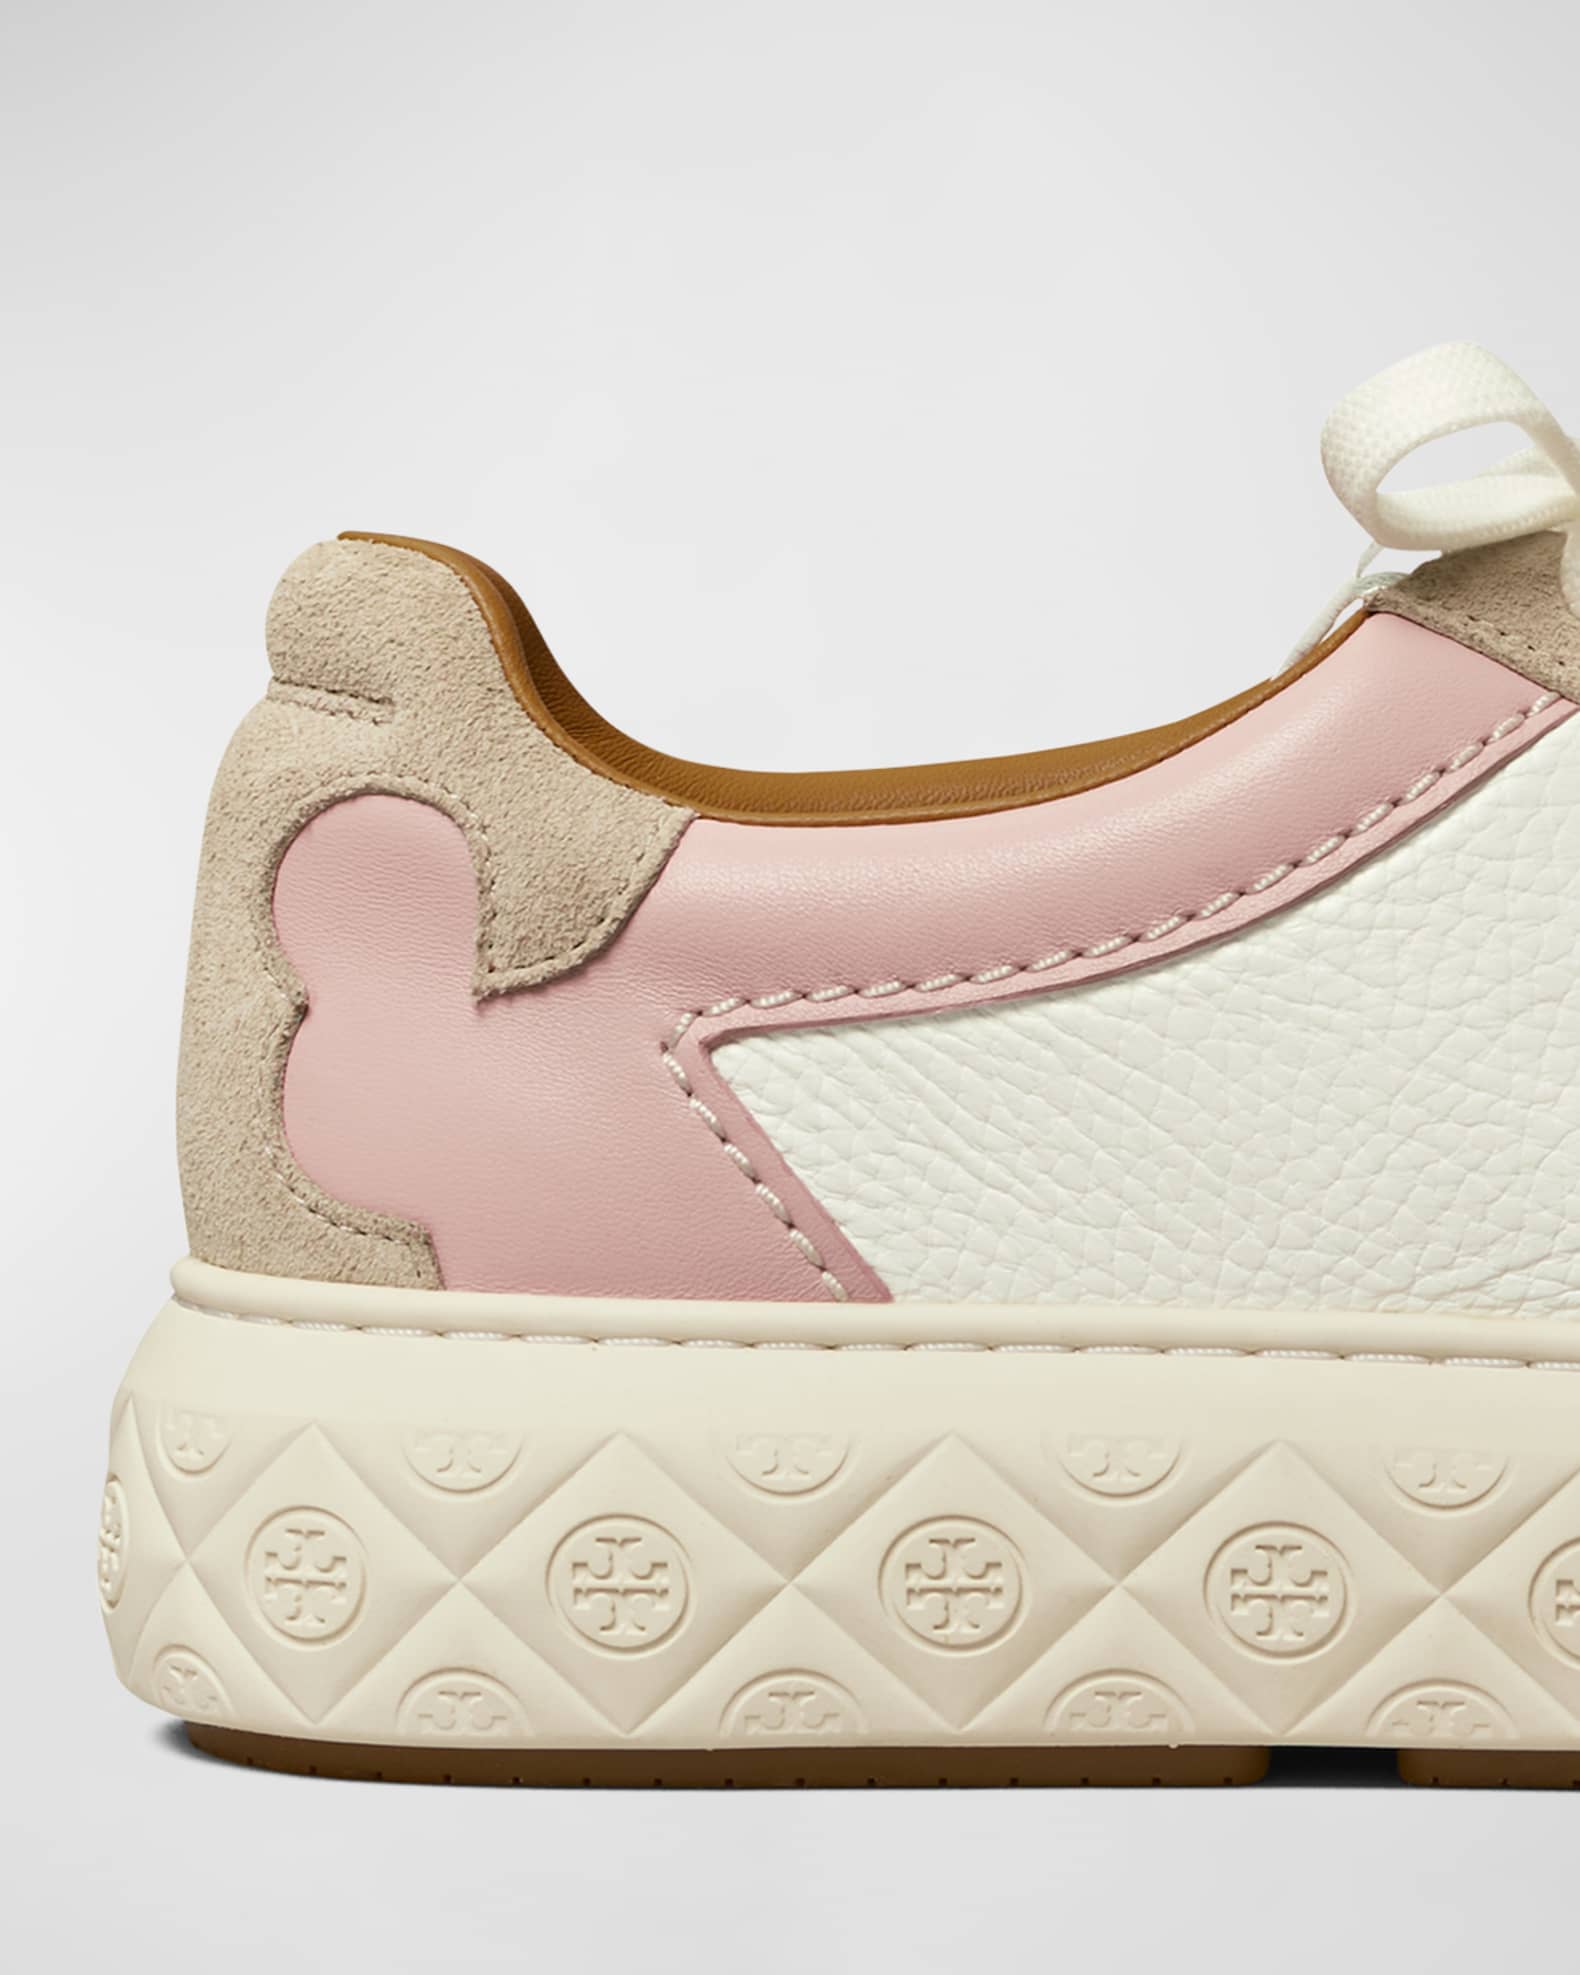 Tory Burch - Ladybug Fabric Low-top Sneakers - Female - 5